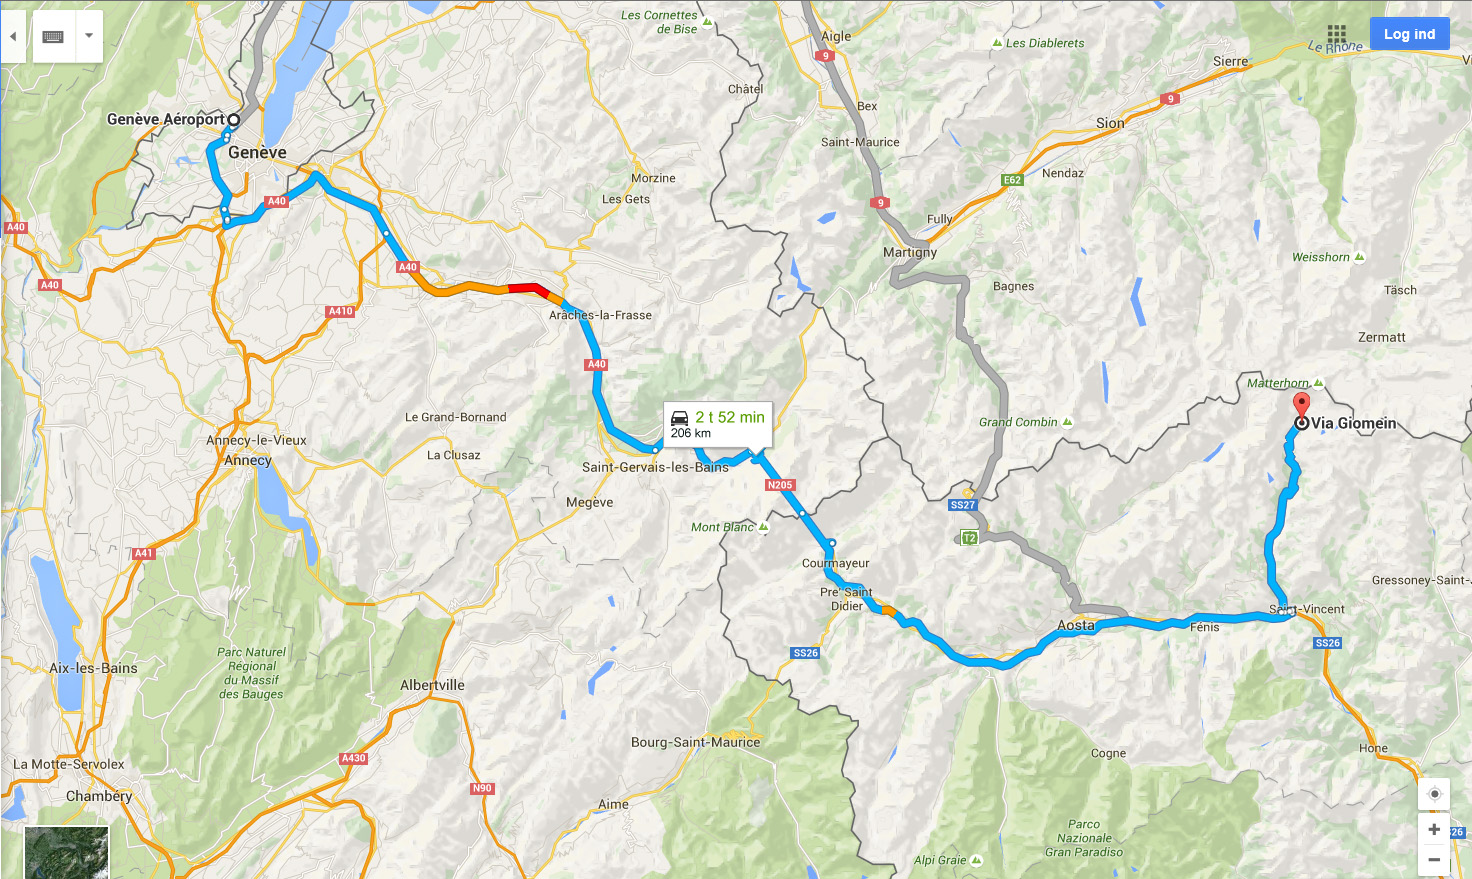 Driving directions from Geneva airport to Cervinia